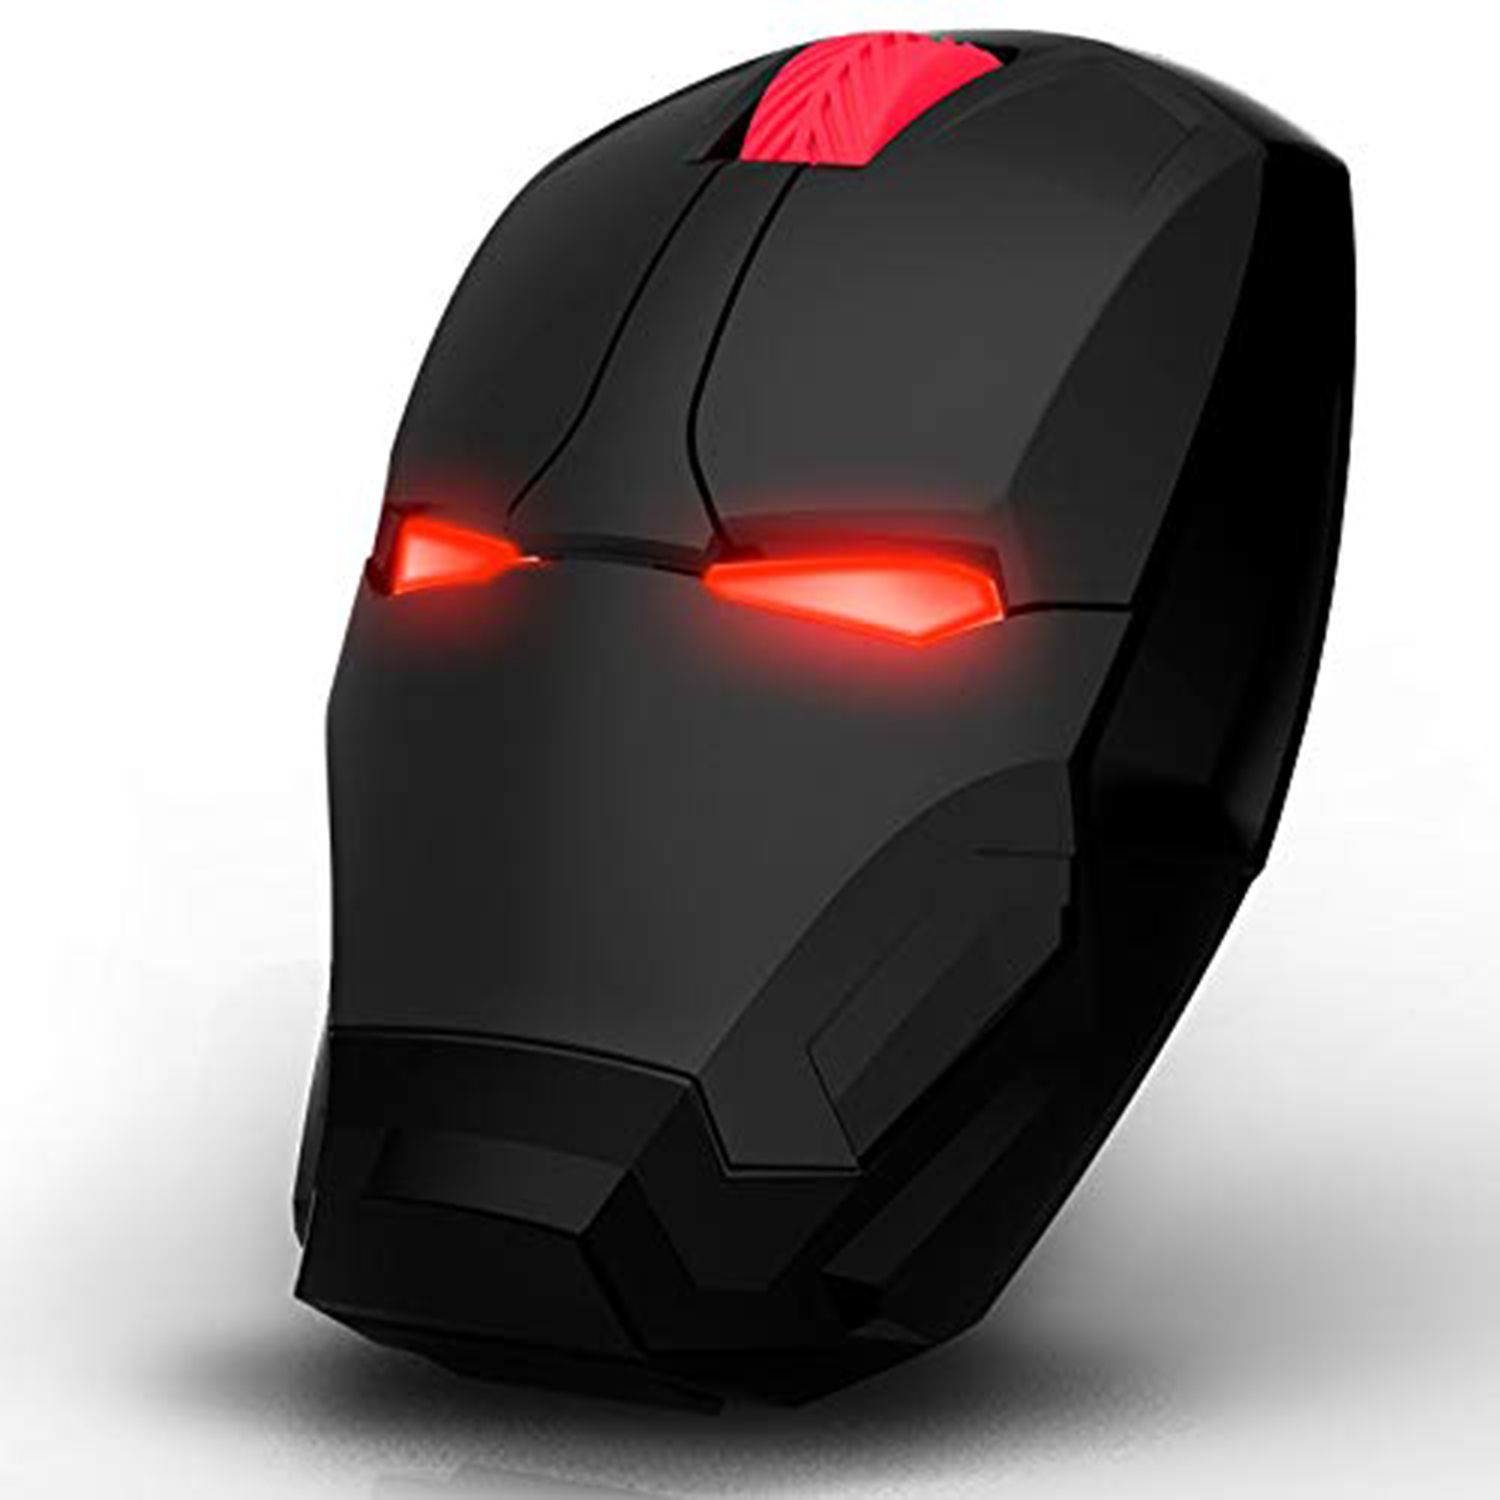 M8 LED Wireless Computer Mouse for Kids,2.4G Ergonomic Portable Silence Mouse Novelty with USB Recei